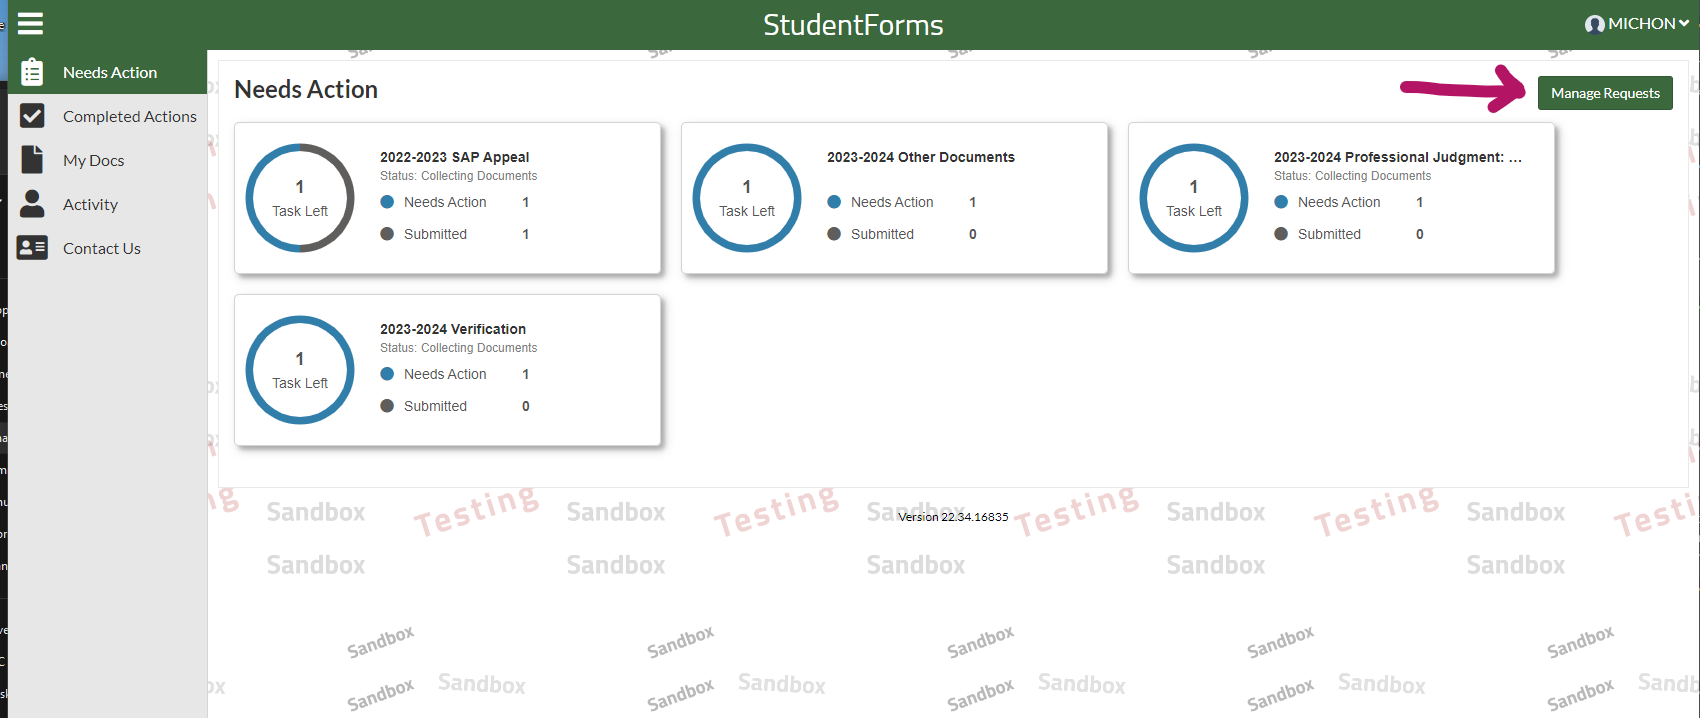 Image of student forms landing page with red arrow pointing to manage requests box